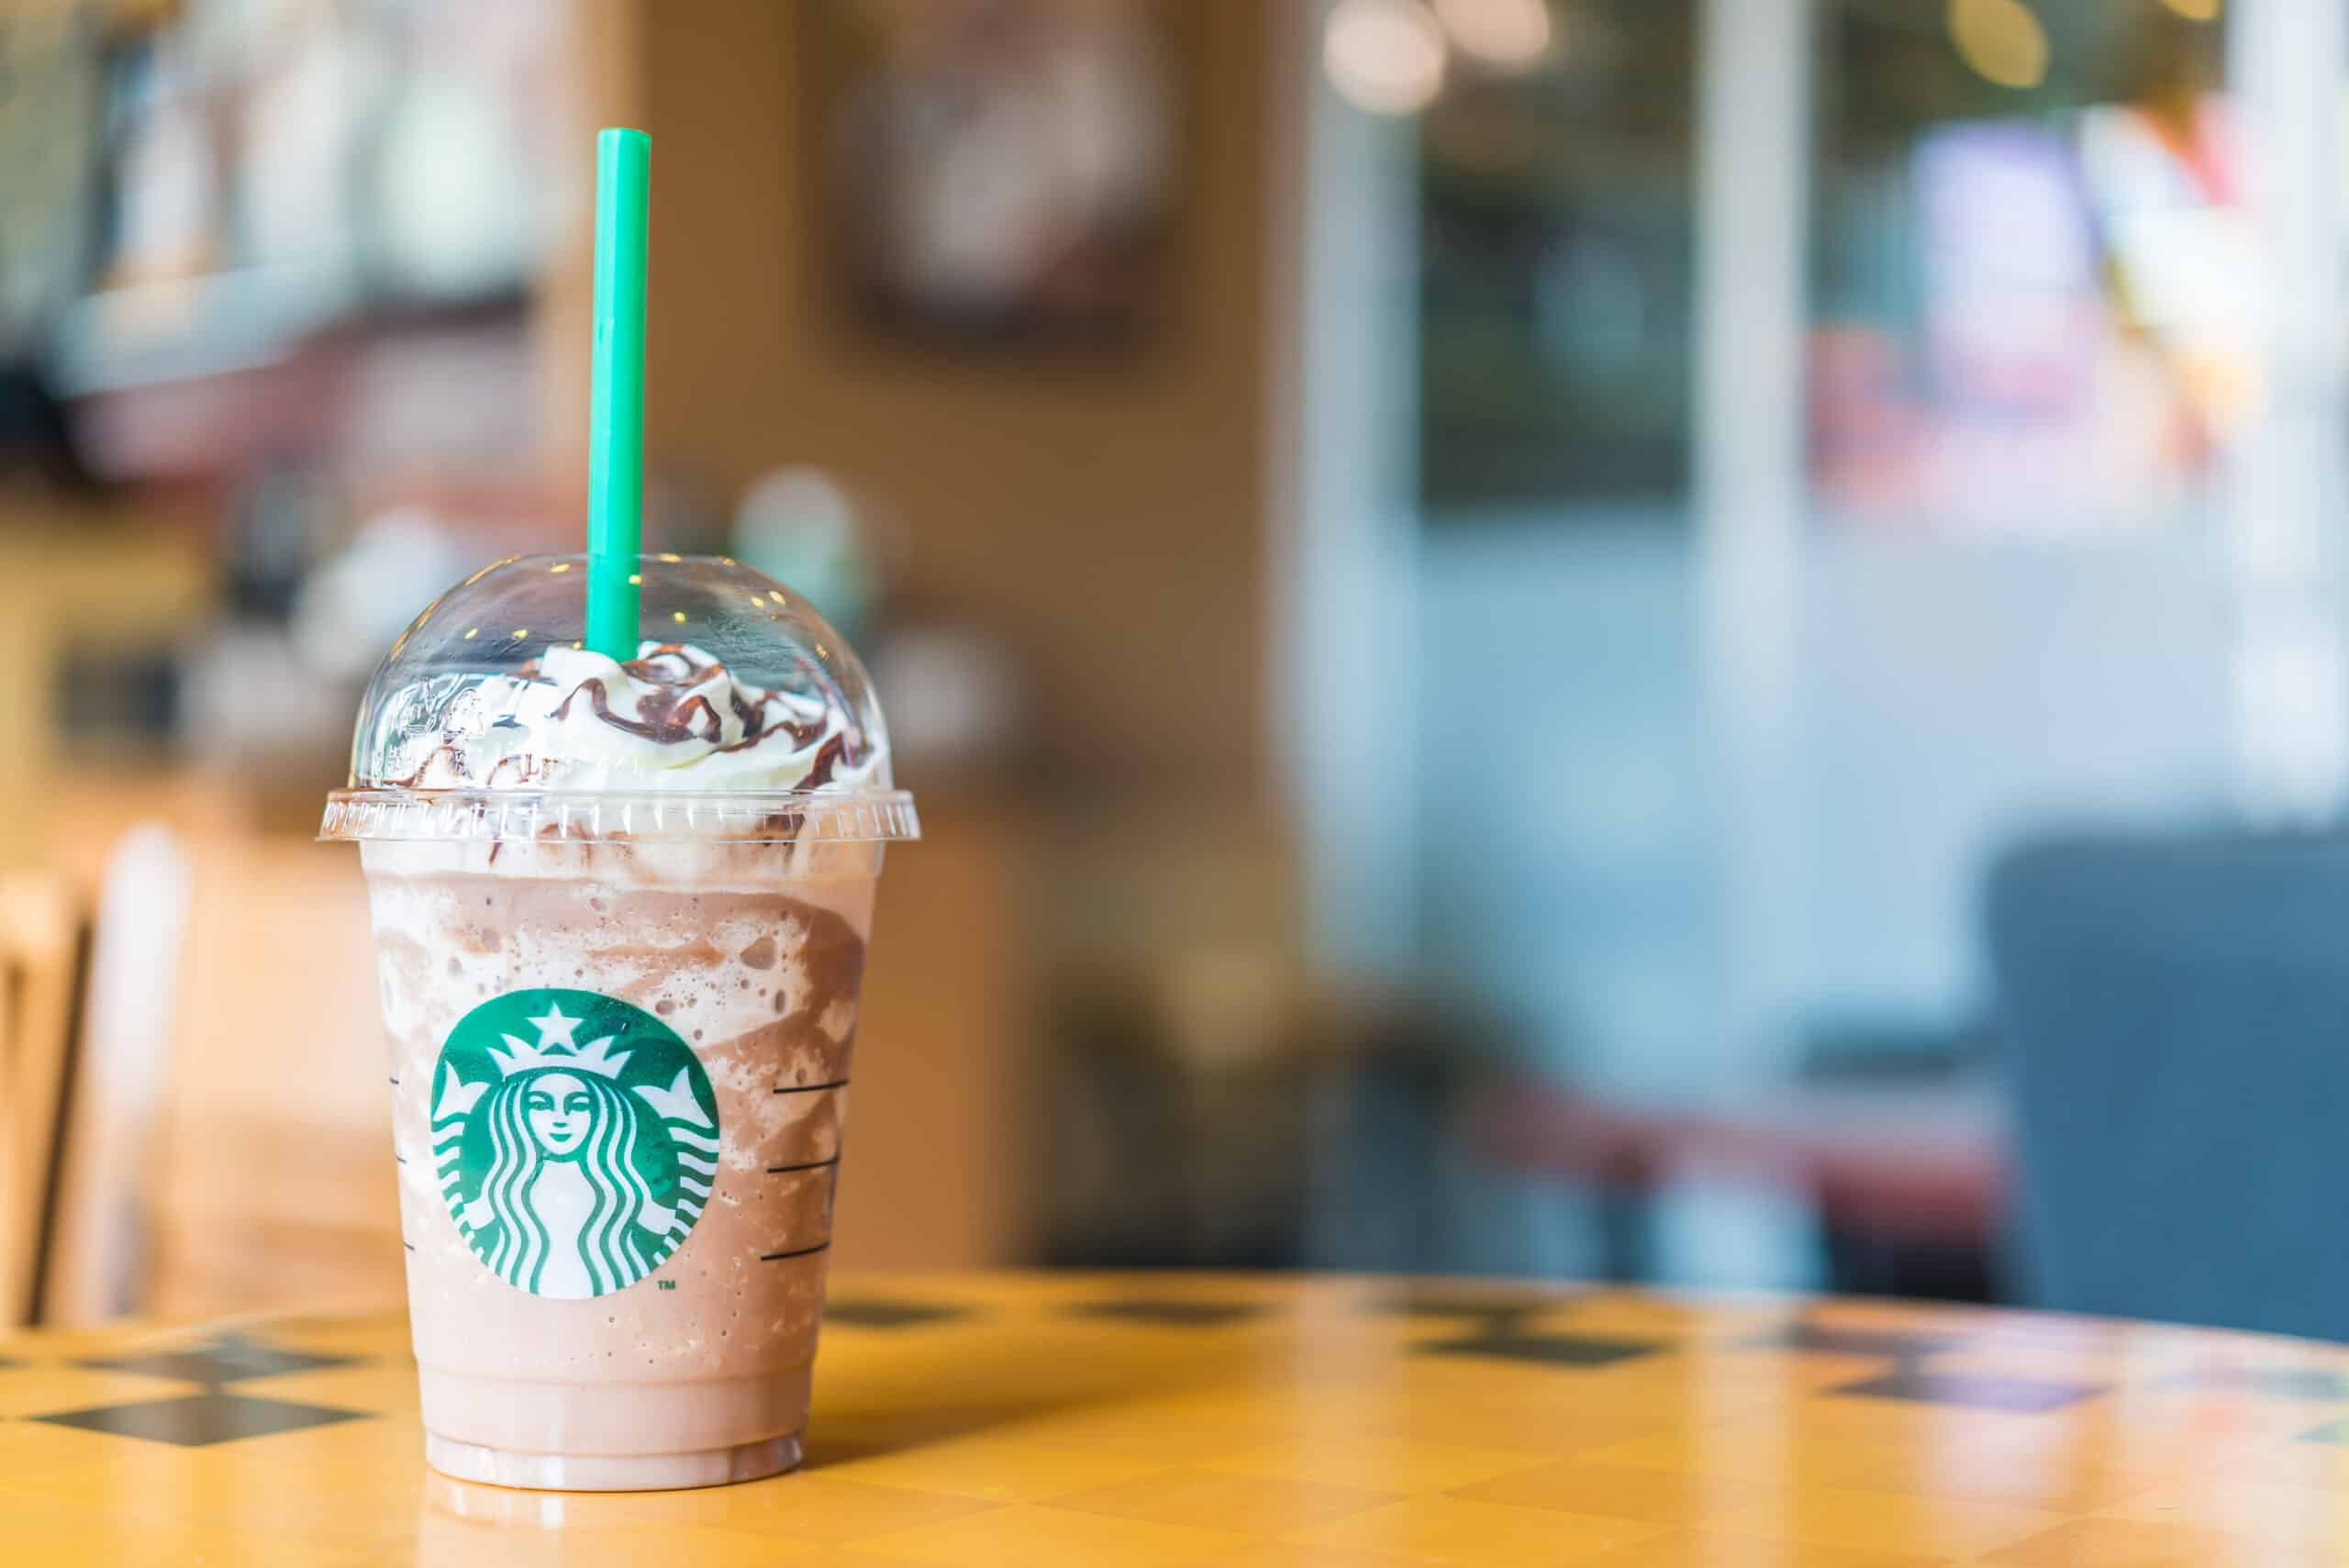 The Evolution of Frappuccino: The Story Behind Starbucks’ Booming Blended Coffee Drink